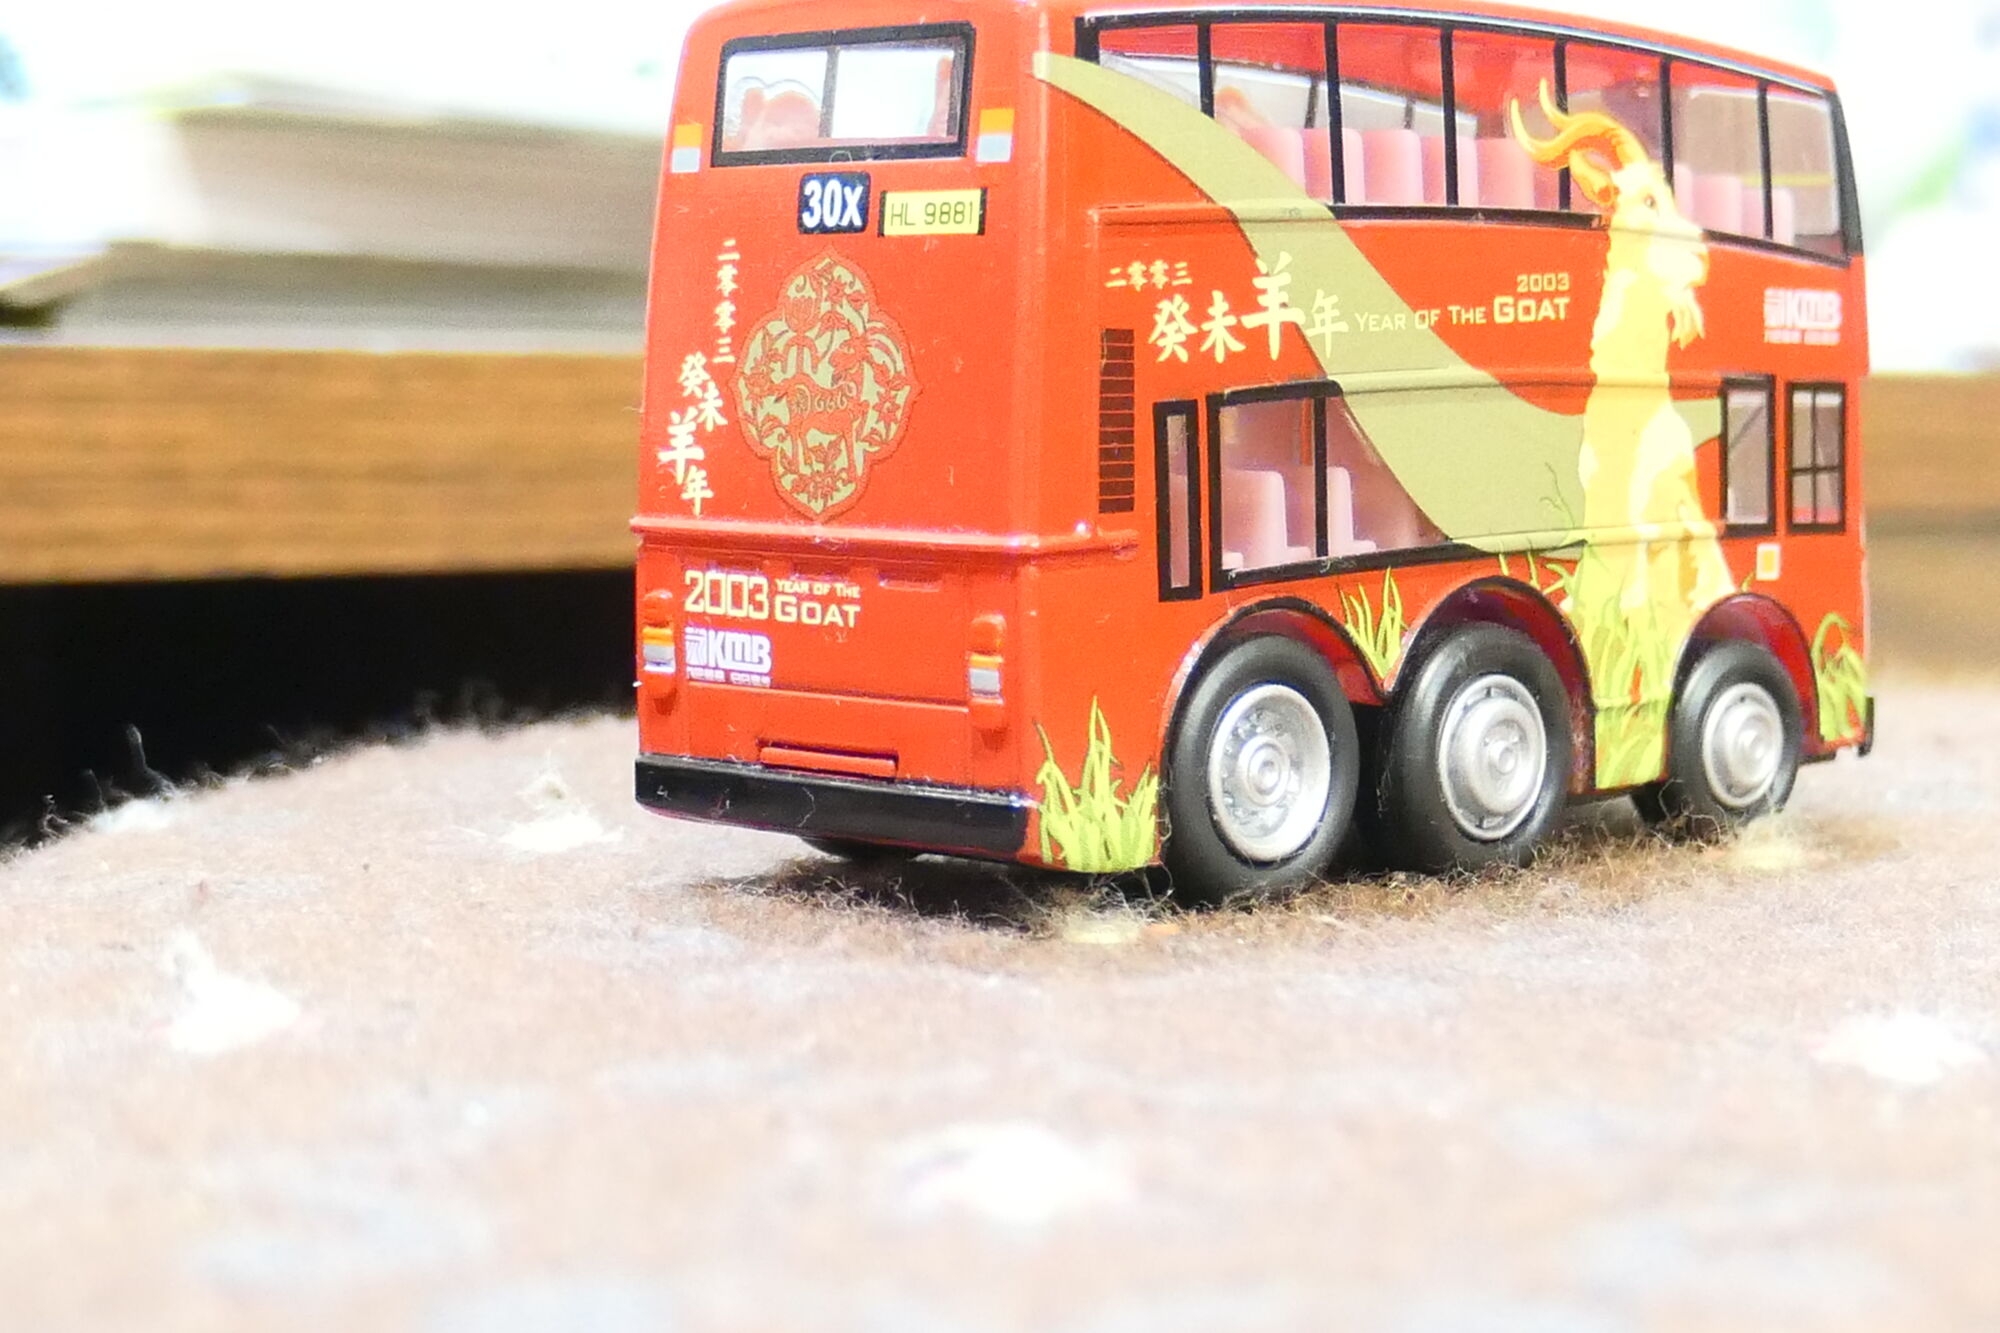 Picture of a red bus toy taken with Panasonic Lumix DC-Z200